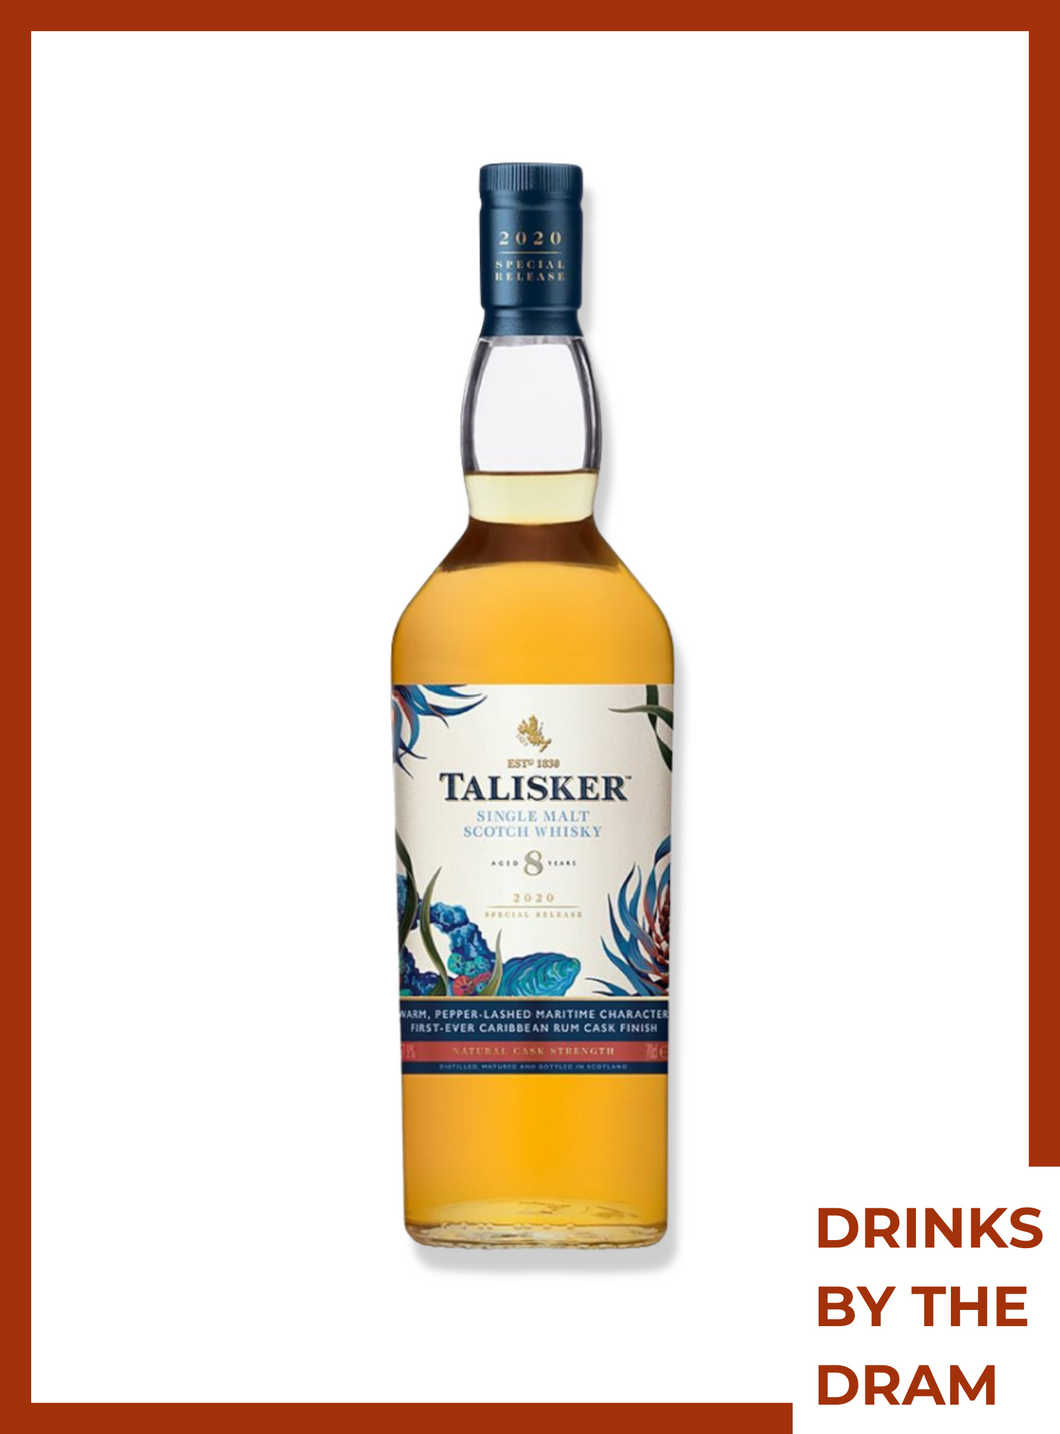 By the Dram (30ml): Talisker 8 Year Old, Special Release 2020, ex-pot still Caribbean rum casks